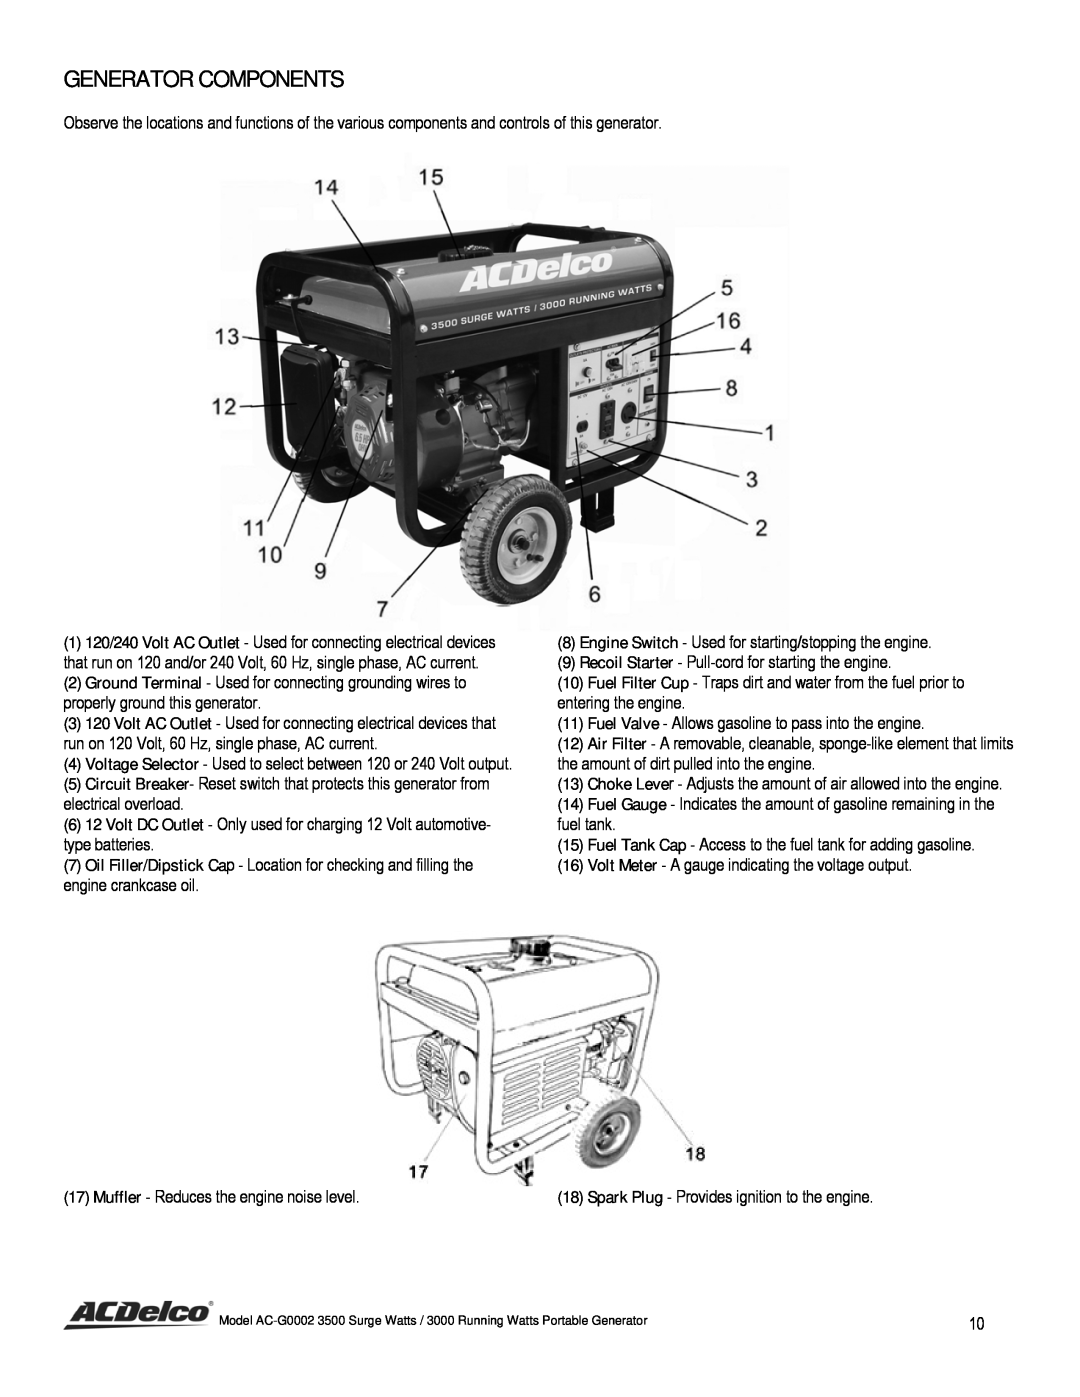 ACDelco AC-G0002 instruction manual Generator Components, Muffler - Reduces the engine noise level 